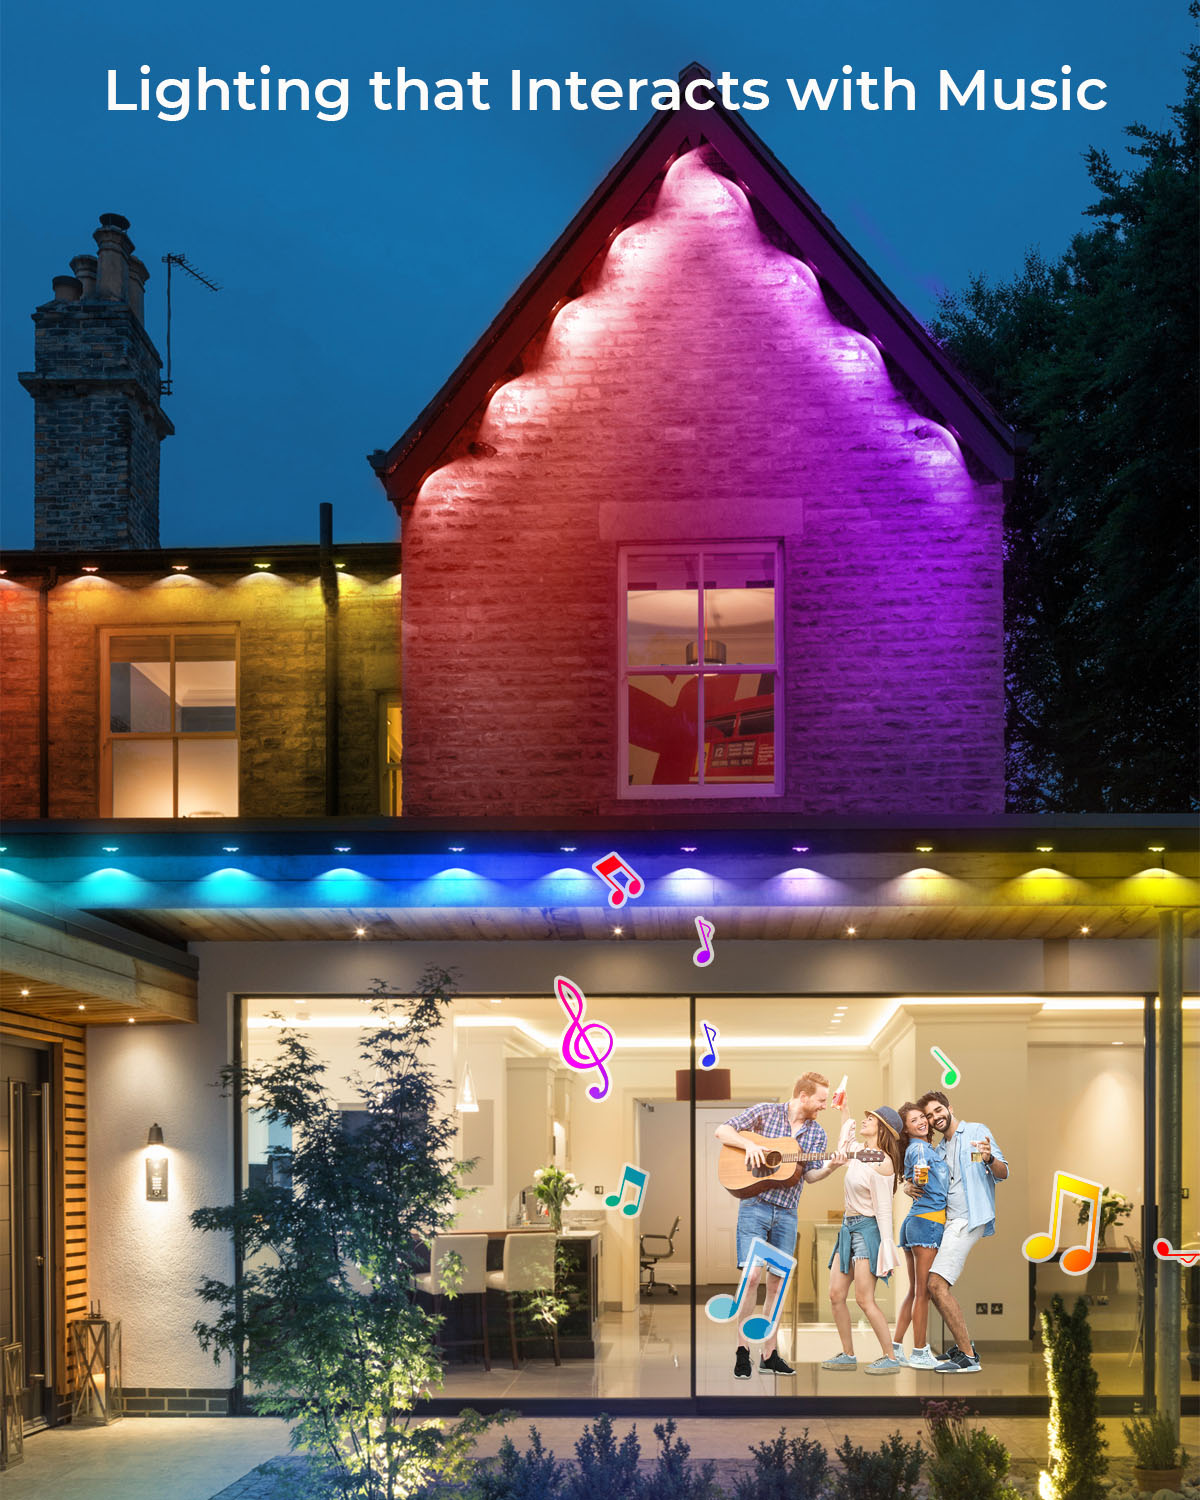 FVTLED Permanent Outdoor  String Lights, 50ft WiFi Smart Dynamic RGB+WW Multi-Color Outdoor Lights, IP65 Waterproof 36 LED Eaves Lights for Party, Christmas Day, Game Day, Daily Lighting